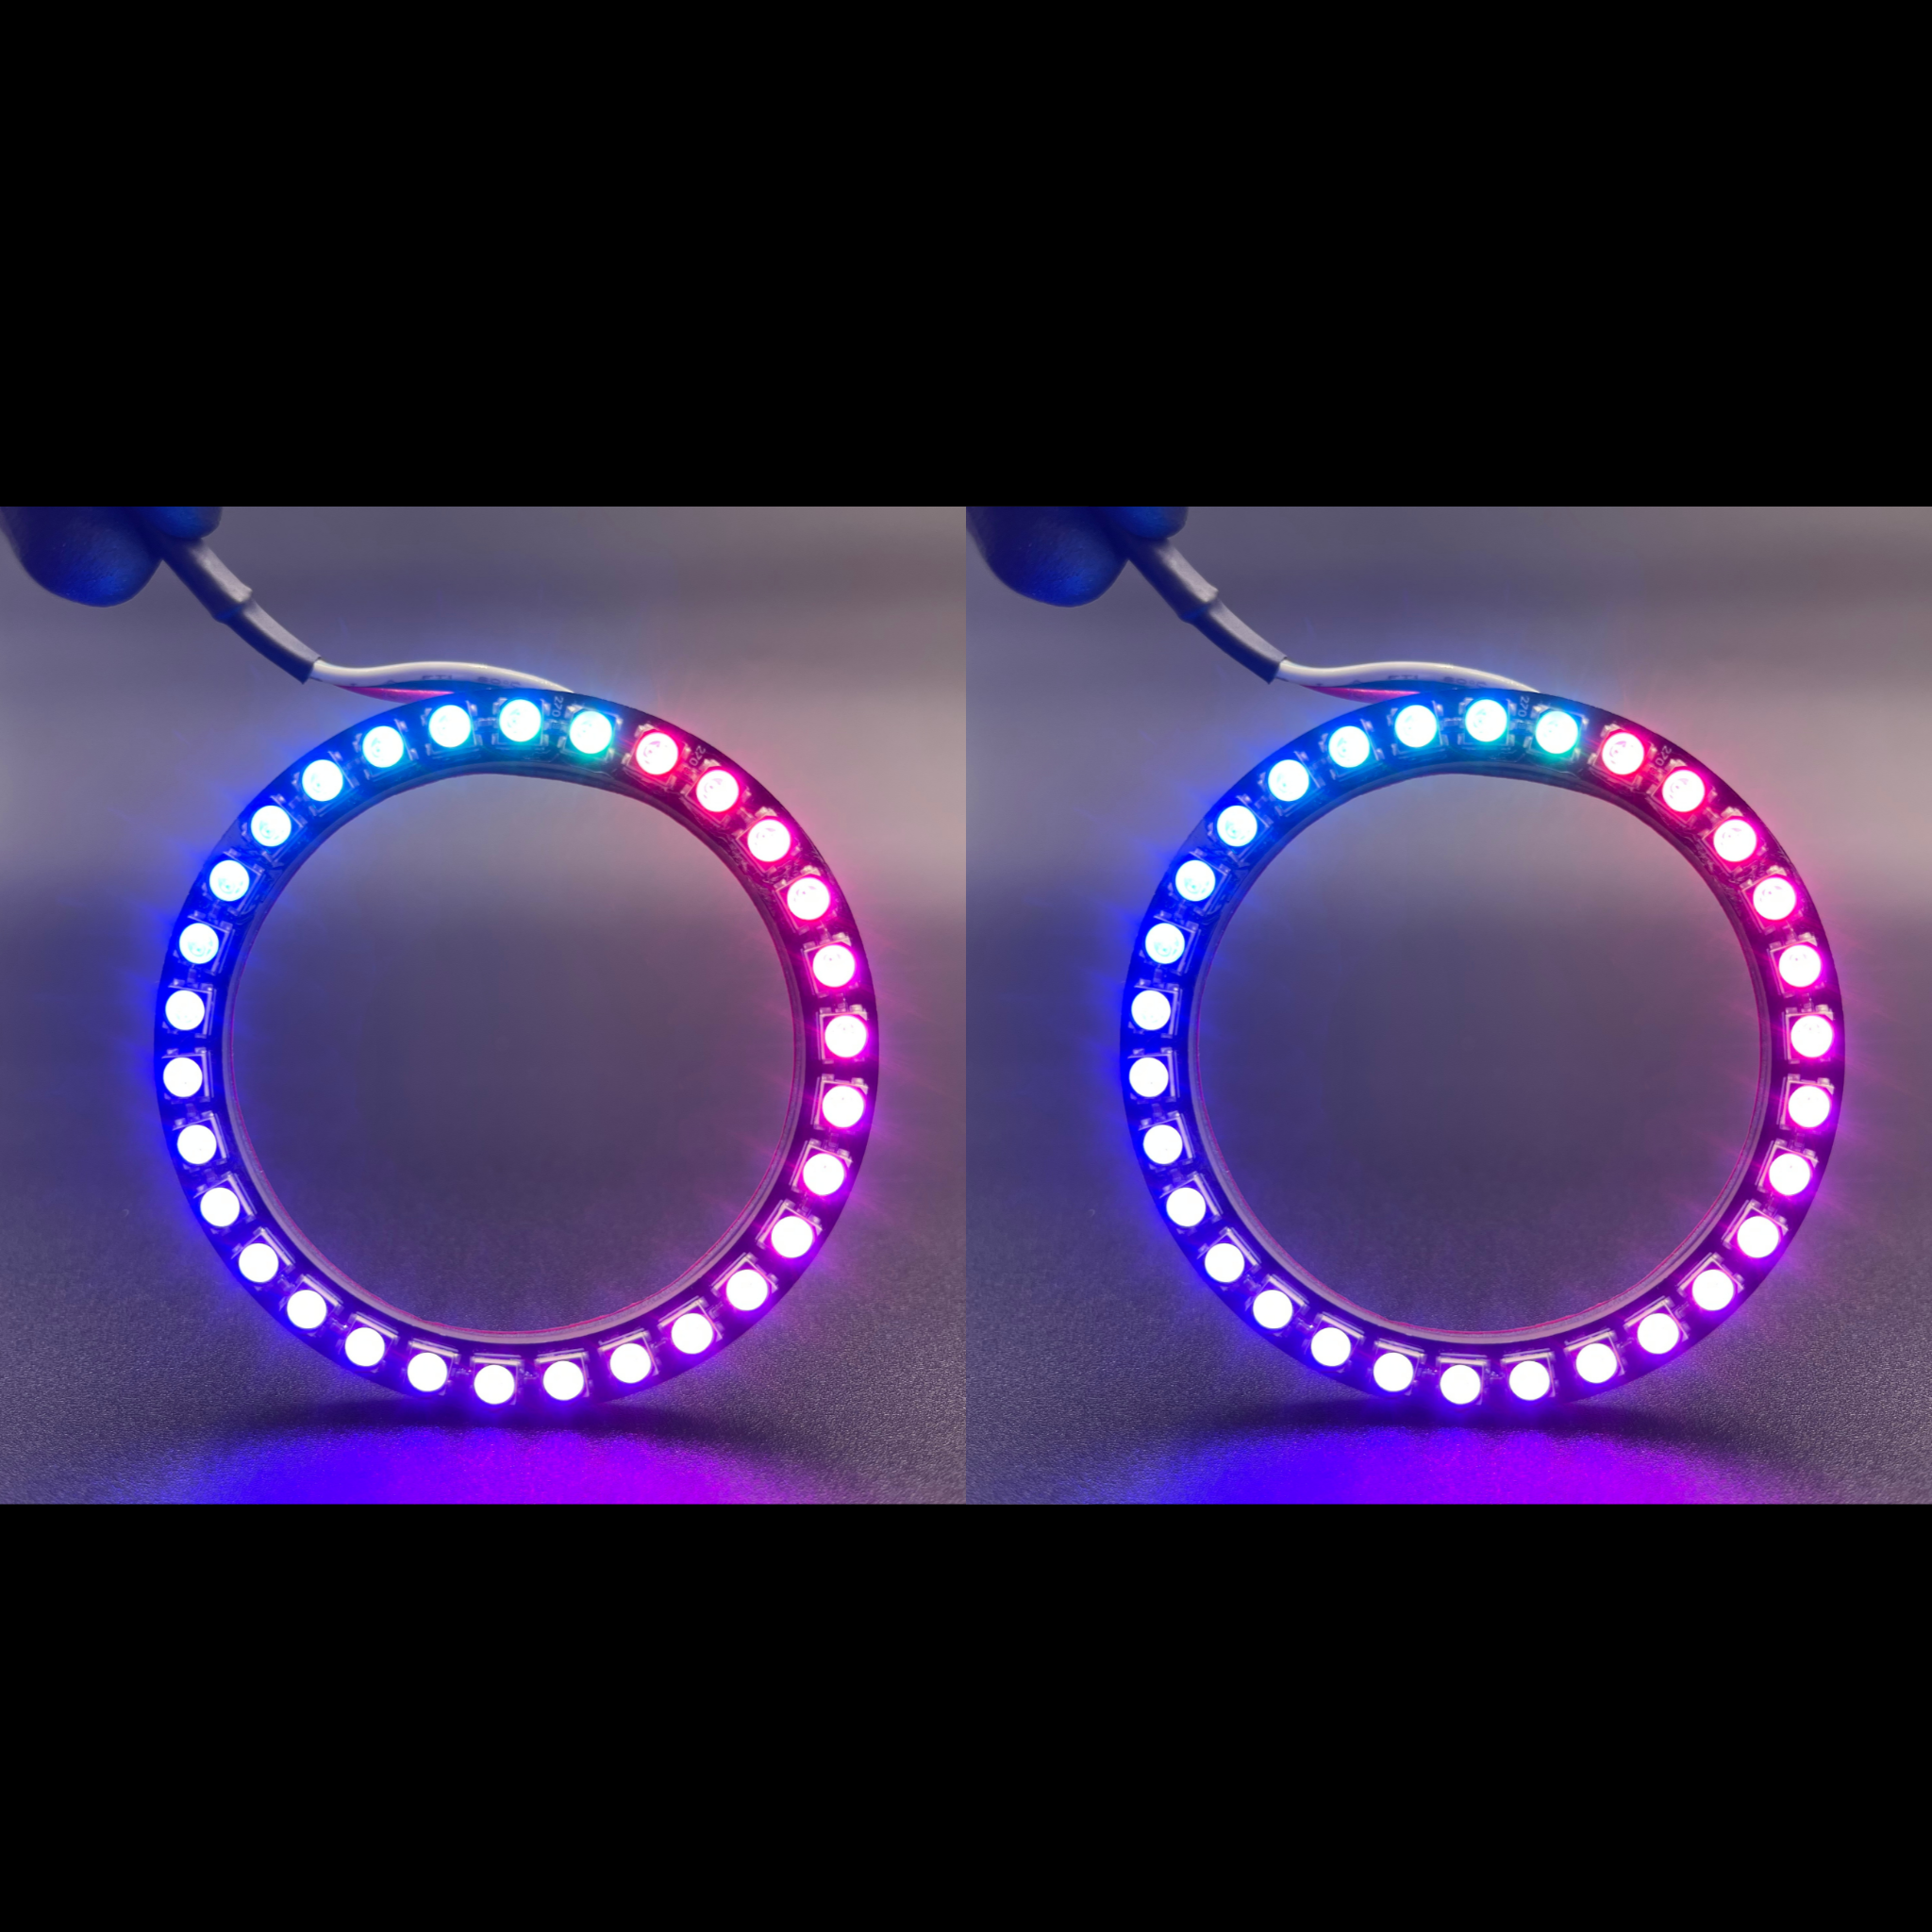 1997-2002 Ford Expedition Multicolor Halo Kit - RGB Halo Kits Multicolor Flow Series Color Chasing RGBWA LED headlight kit Colorshift Oracle Lighting Trendz OneUpLighting Morimoto theretrofitsource AutoLEDTech Diode Dynamics